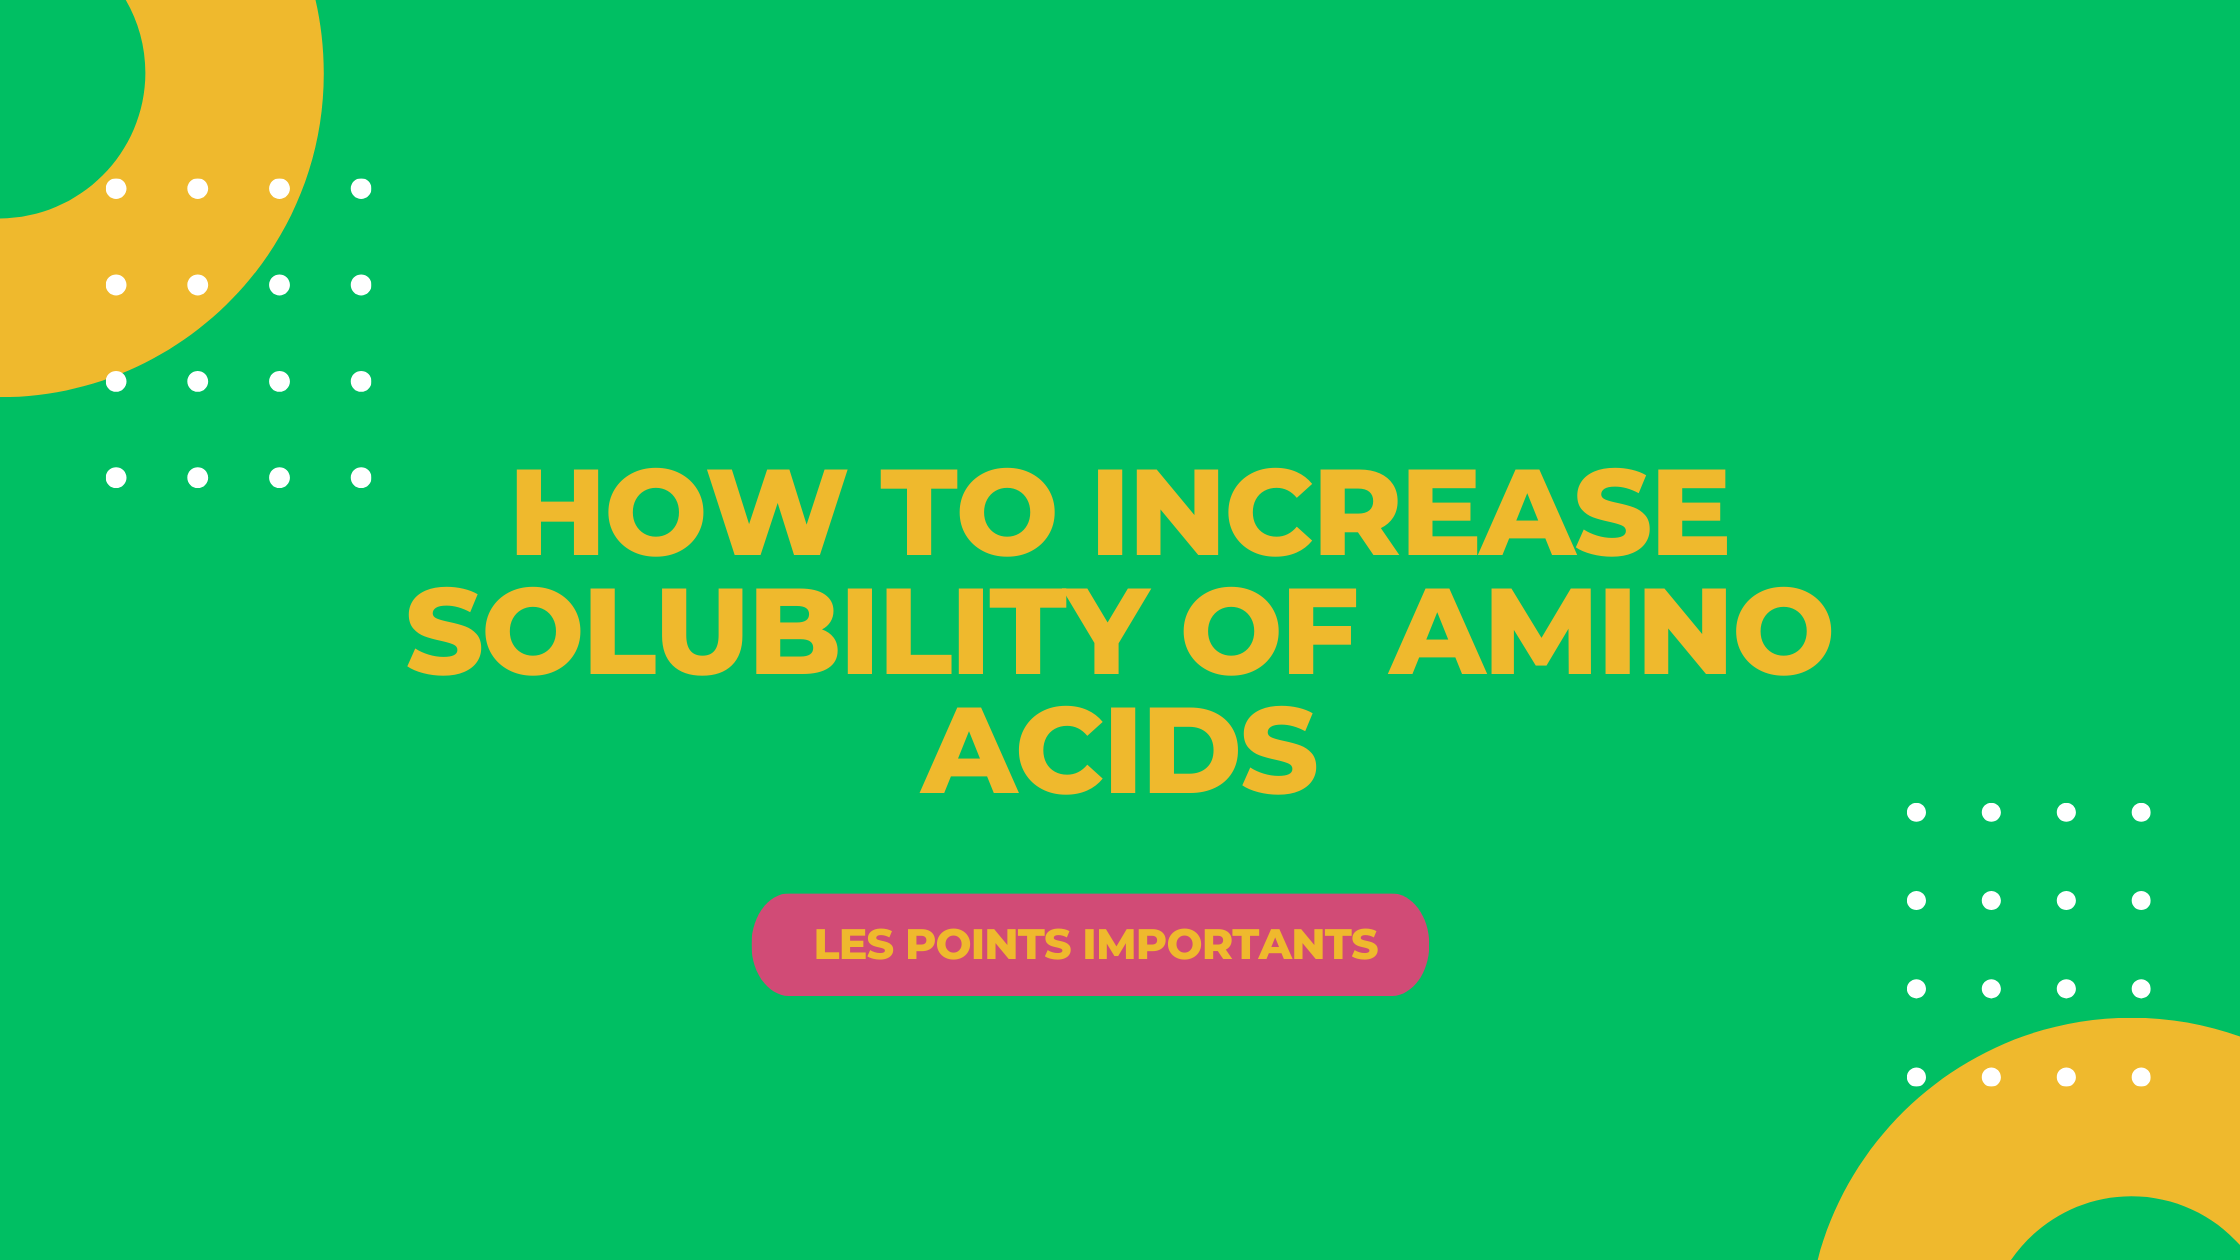 how to increase solubility of amino acids | Les points importants